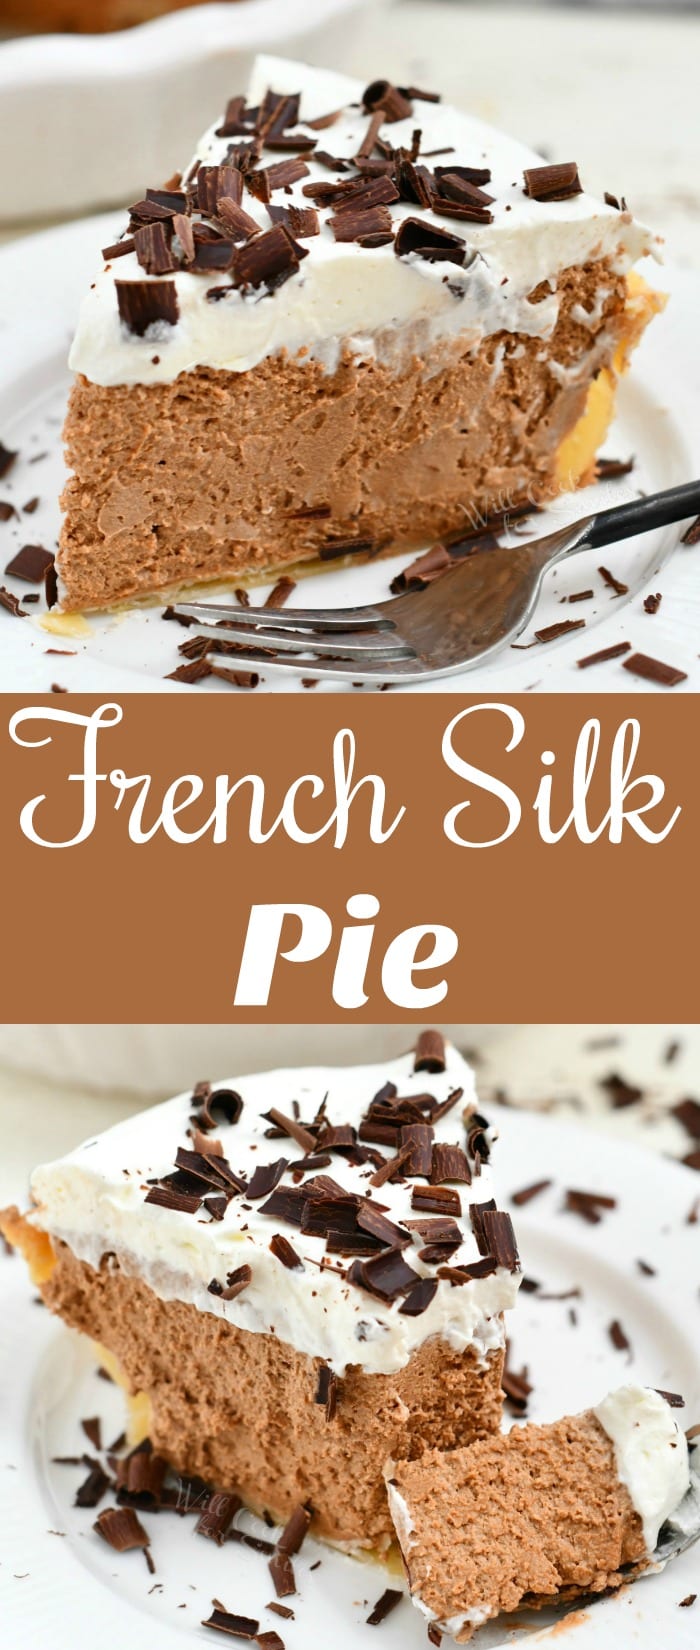 titled image (and shown): French Silk Pie